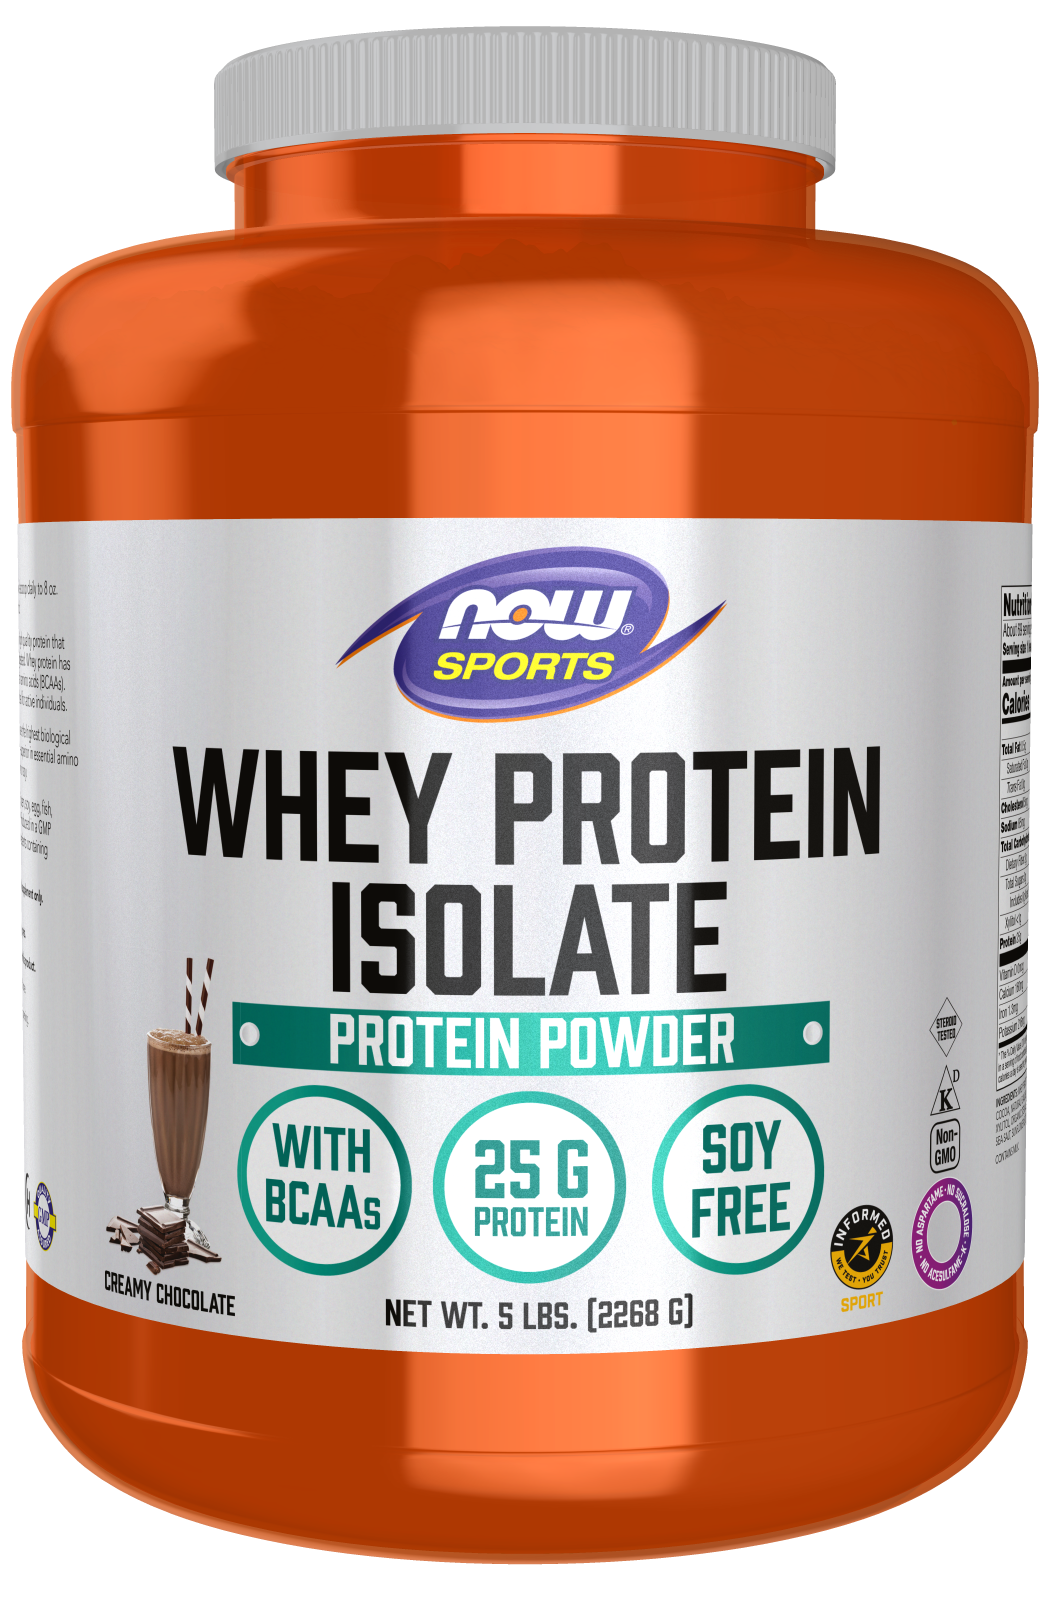 Whey Protein Isolate, Creamy Chocolate Powder - 5 lbs. Canaster Front